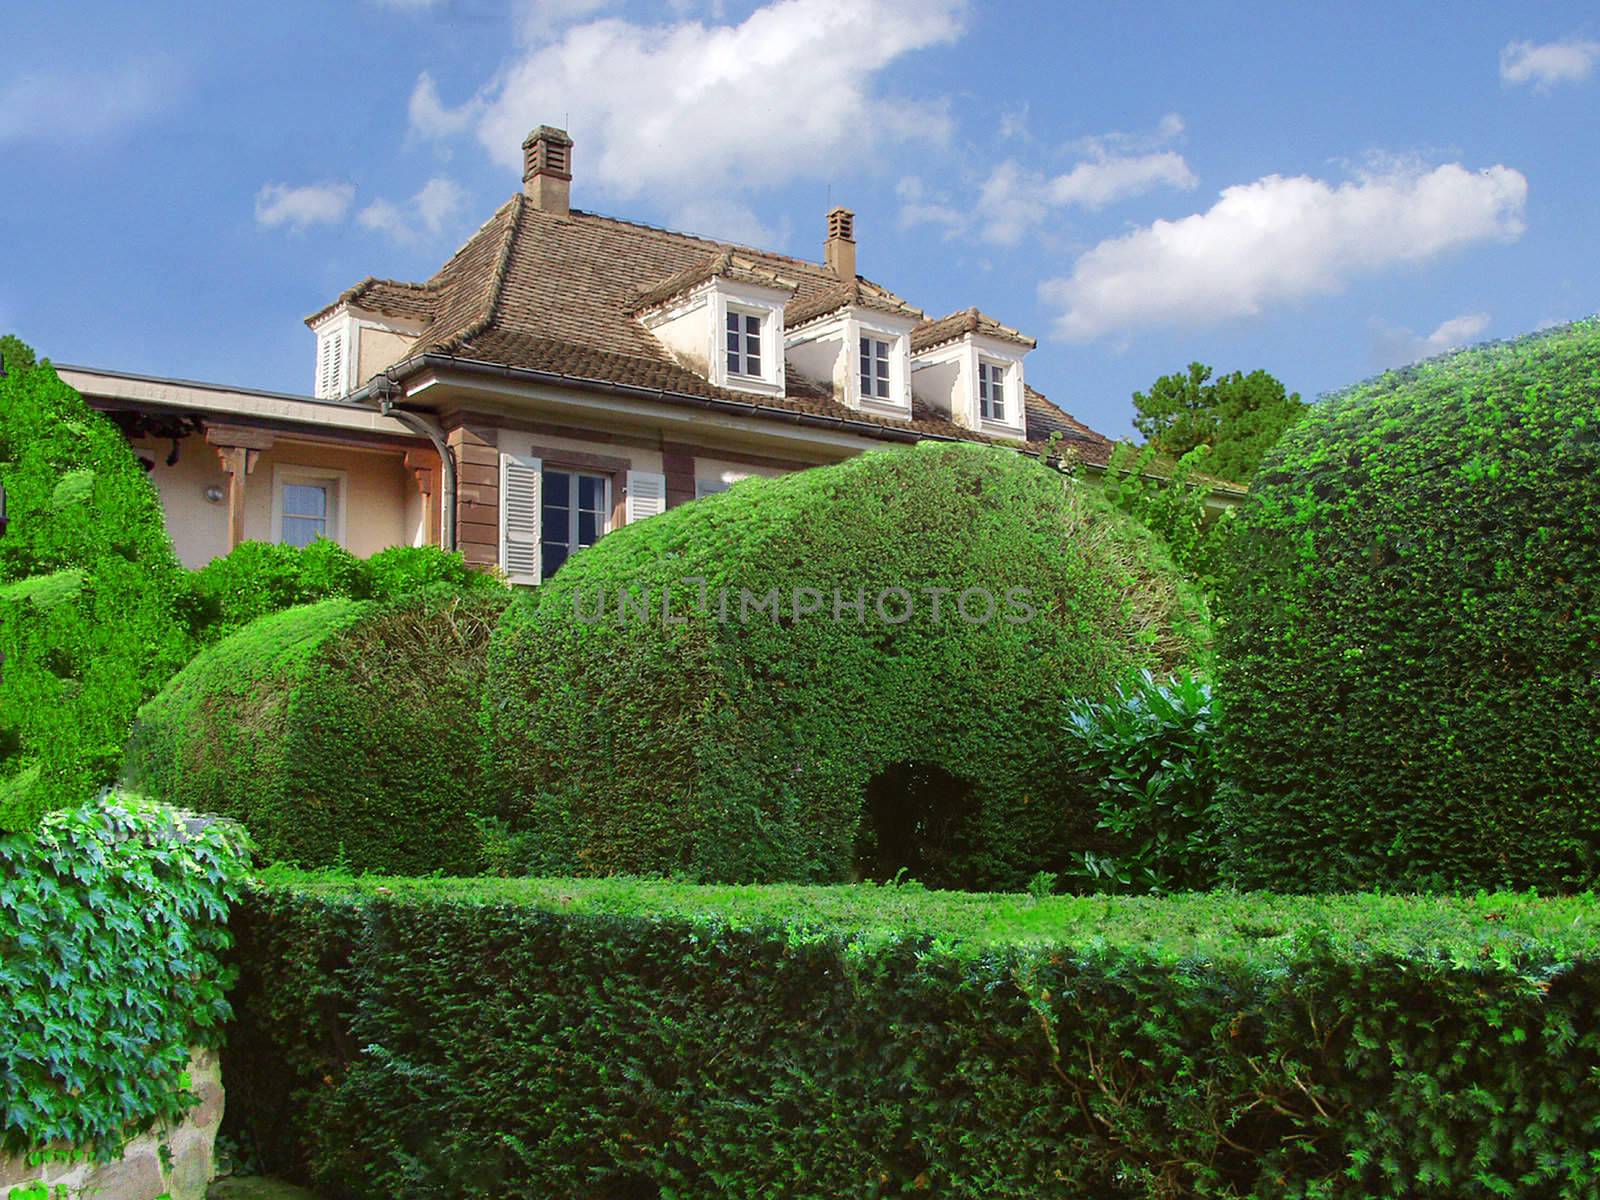 Beautifully trimmed boxwood bushes by NickNick